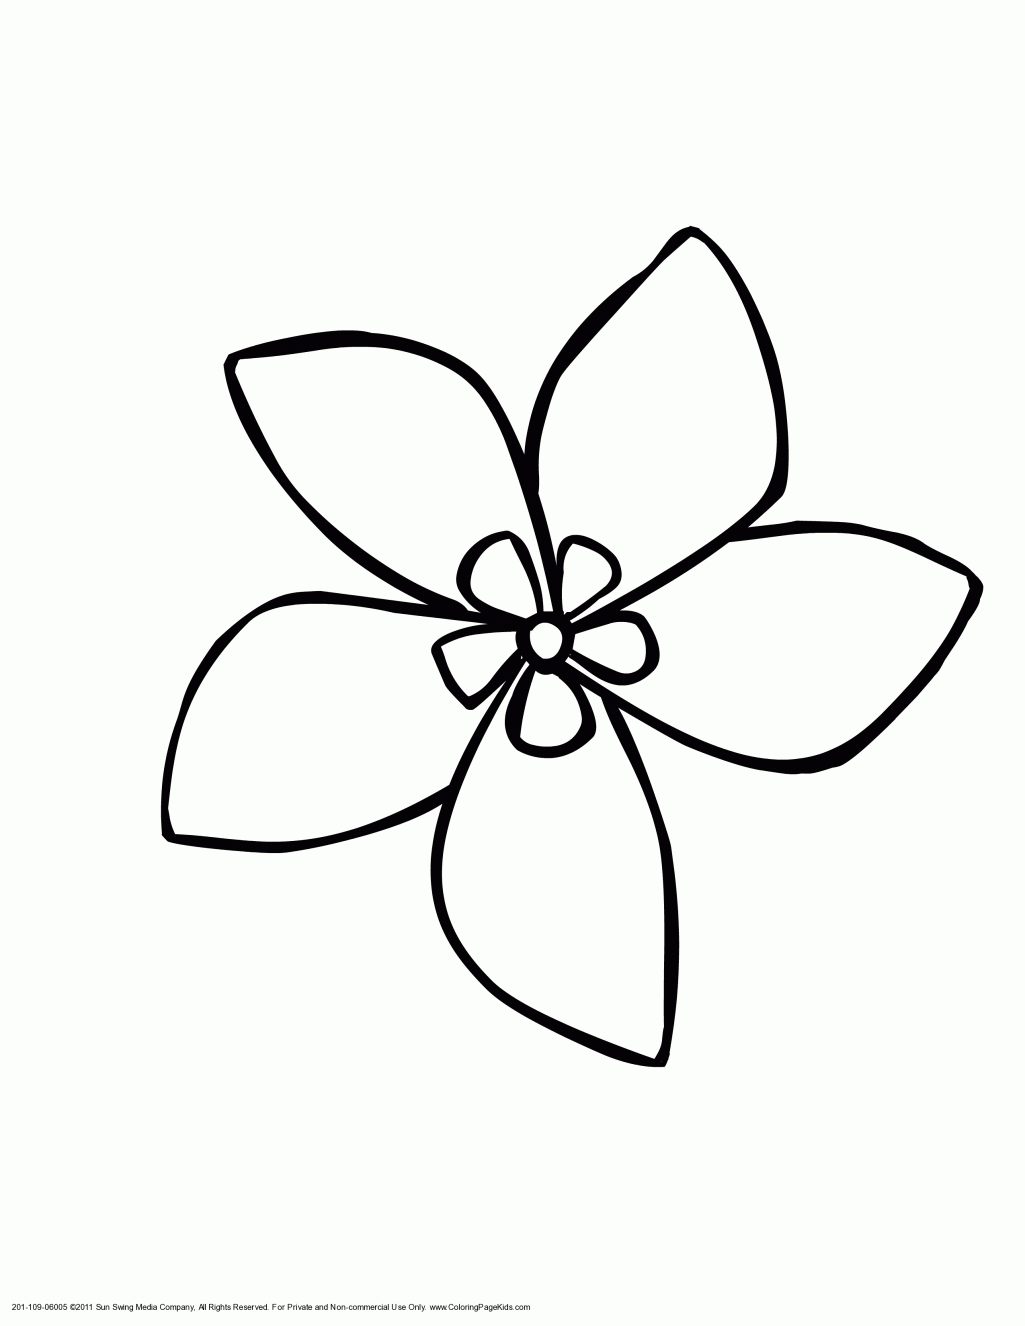 Printable Luau Flowers - Coloring Pages for Kids and for Adults